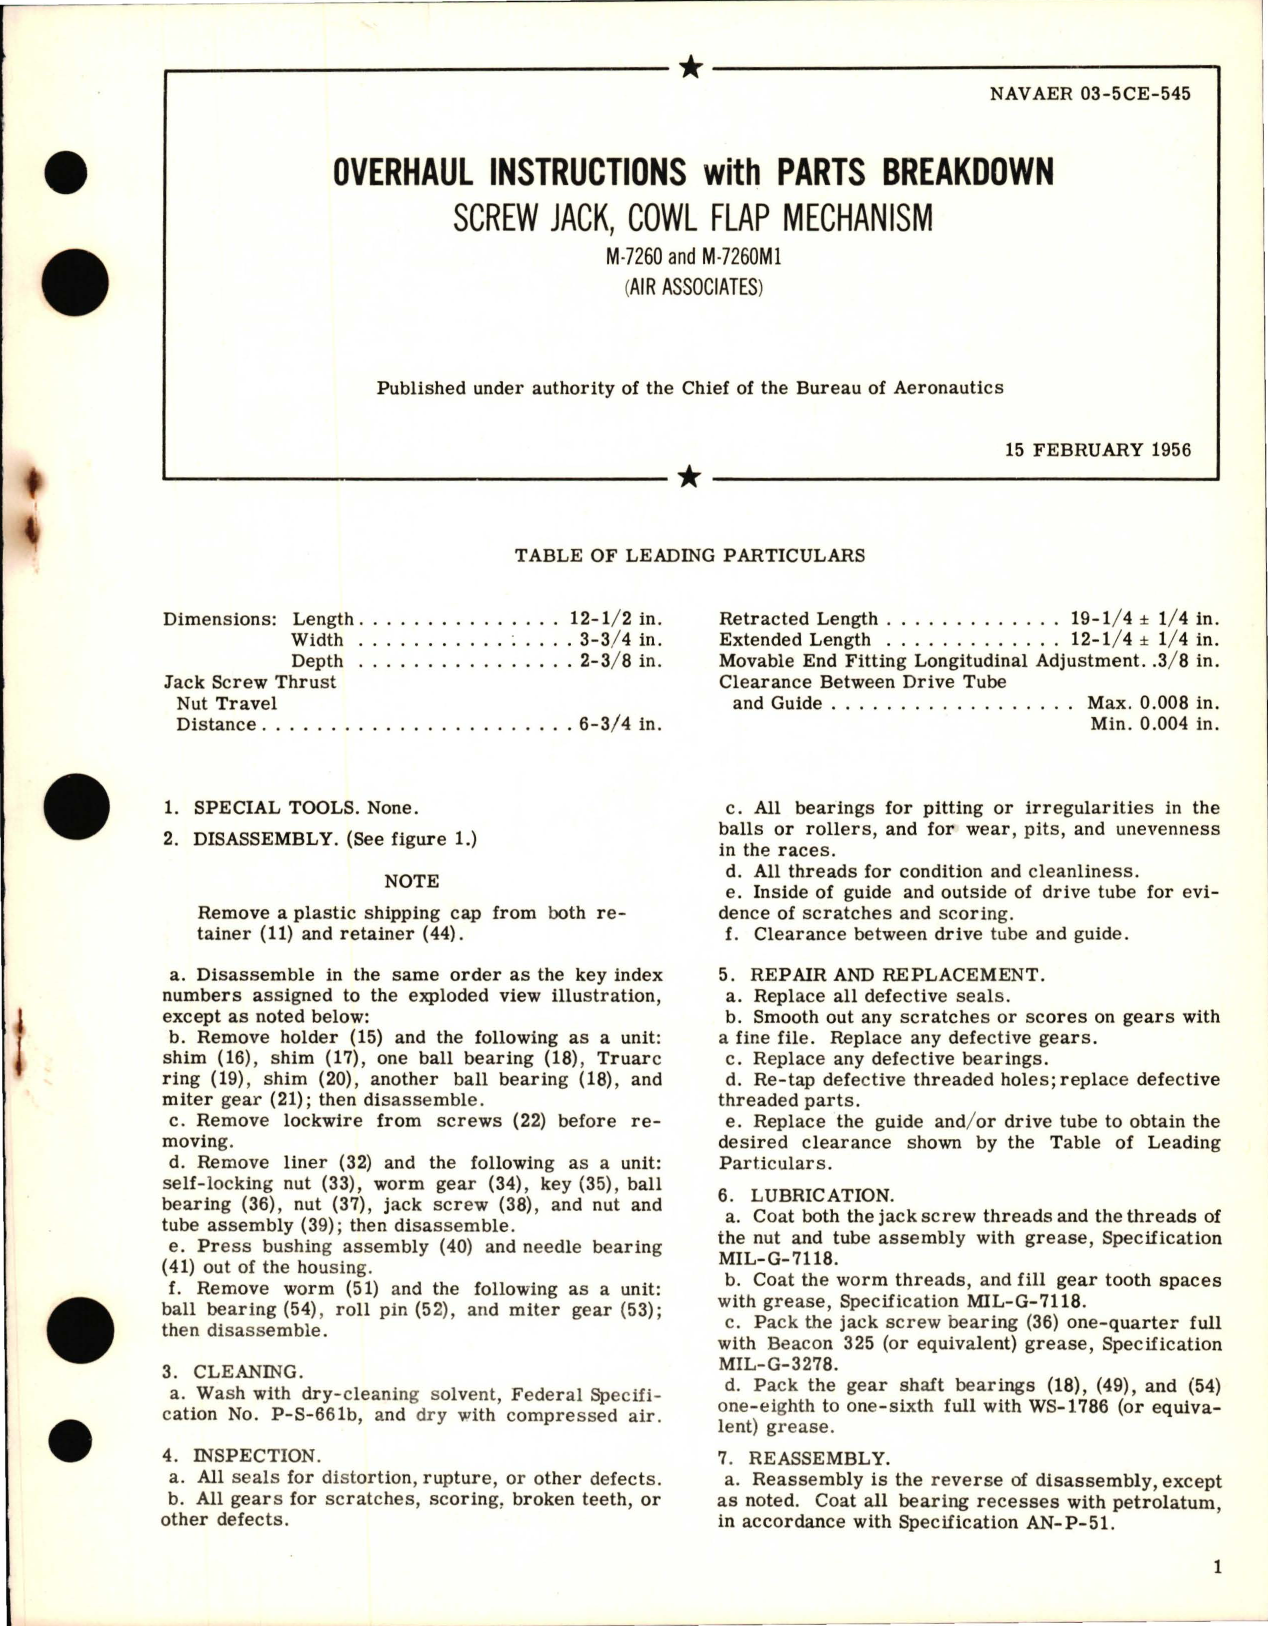 Sample page 1 from AirCorps Library document: Overhaul Instructions with Parts Breakdown for Screw Jack, Cowl Flap Mechanism - M-7260 and M-7260M1